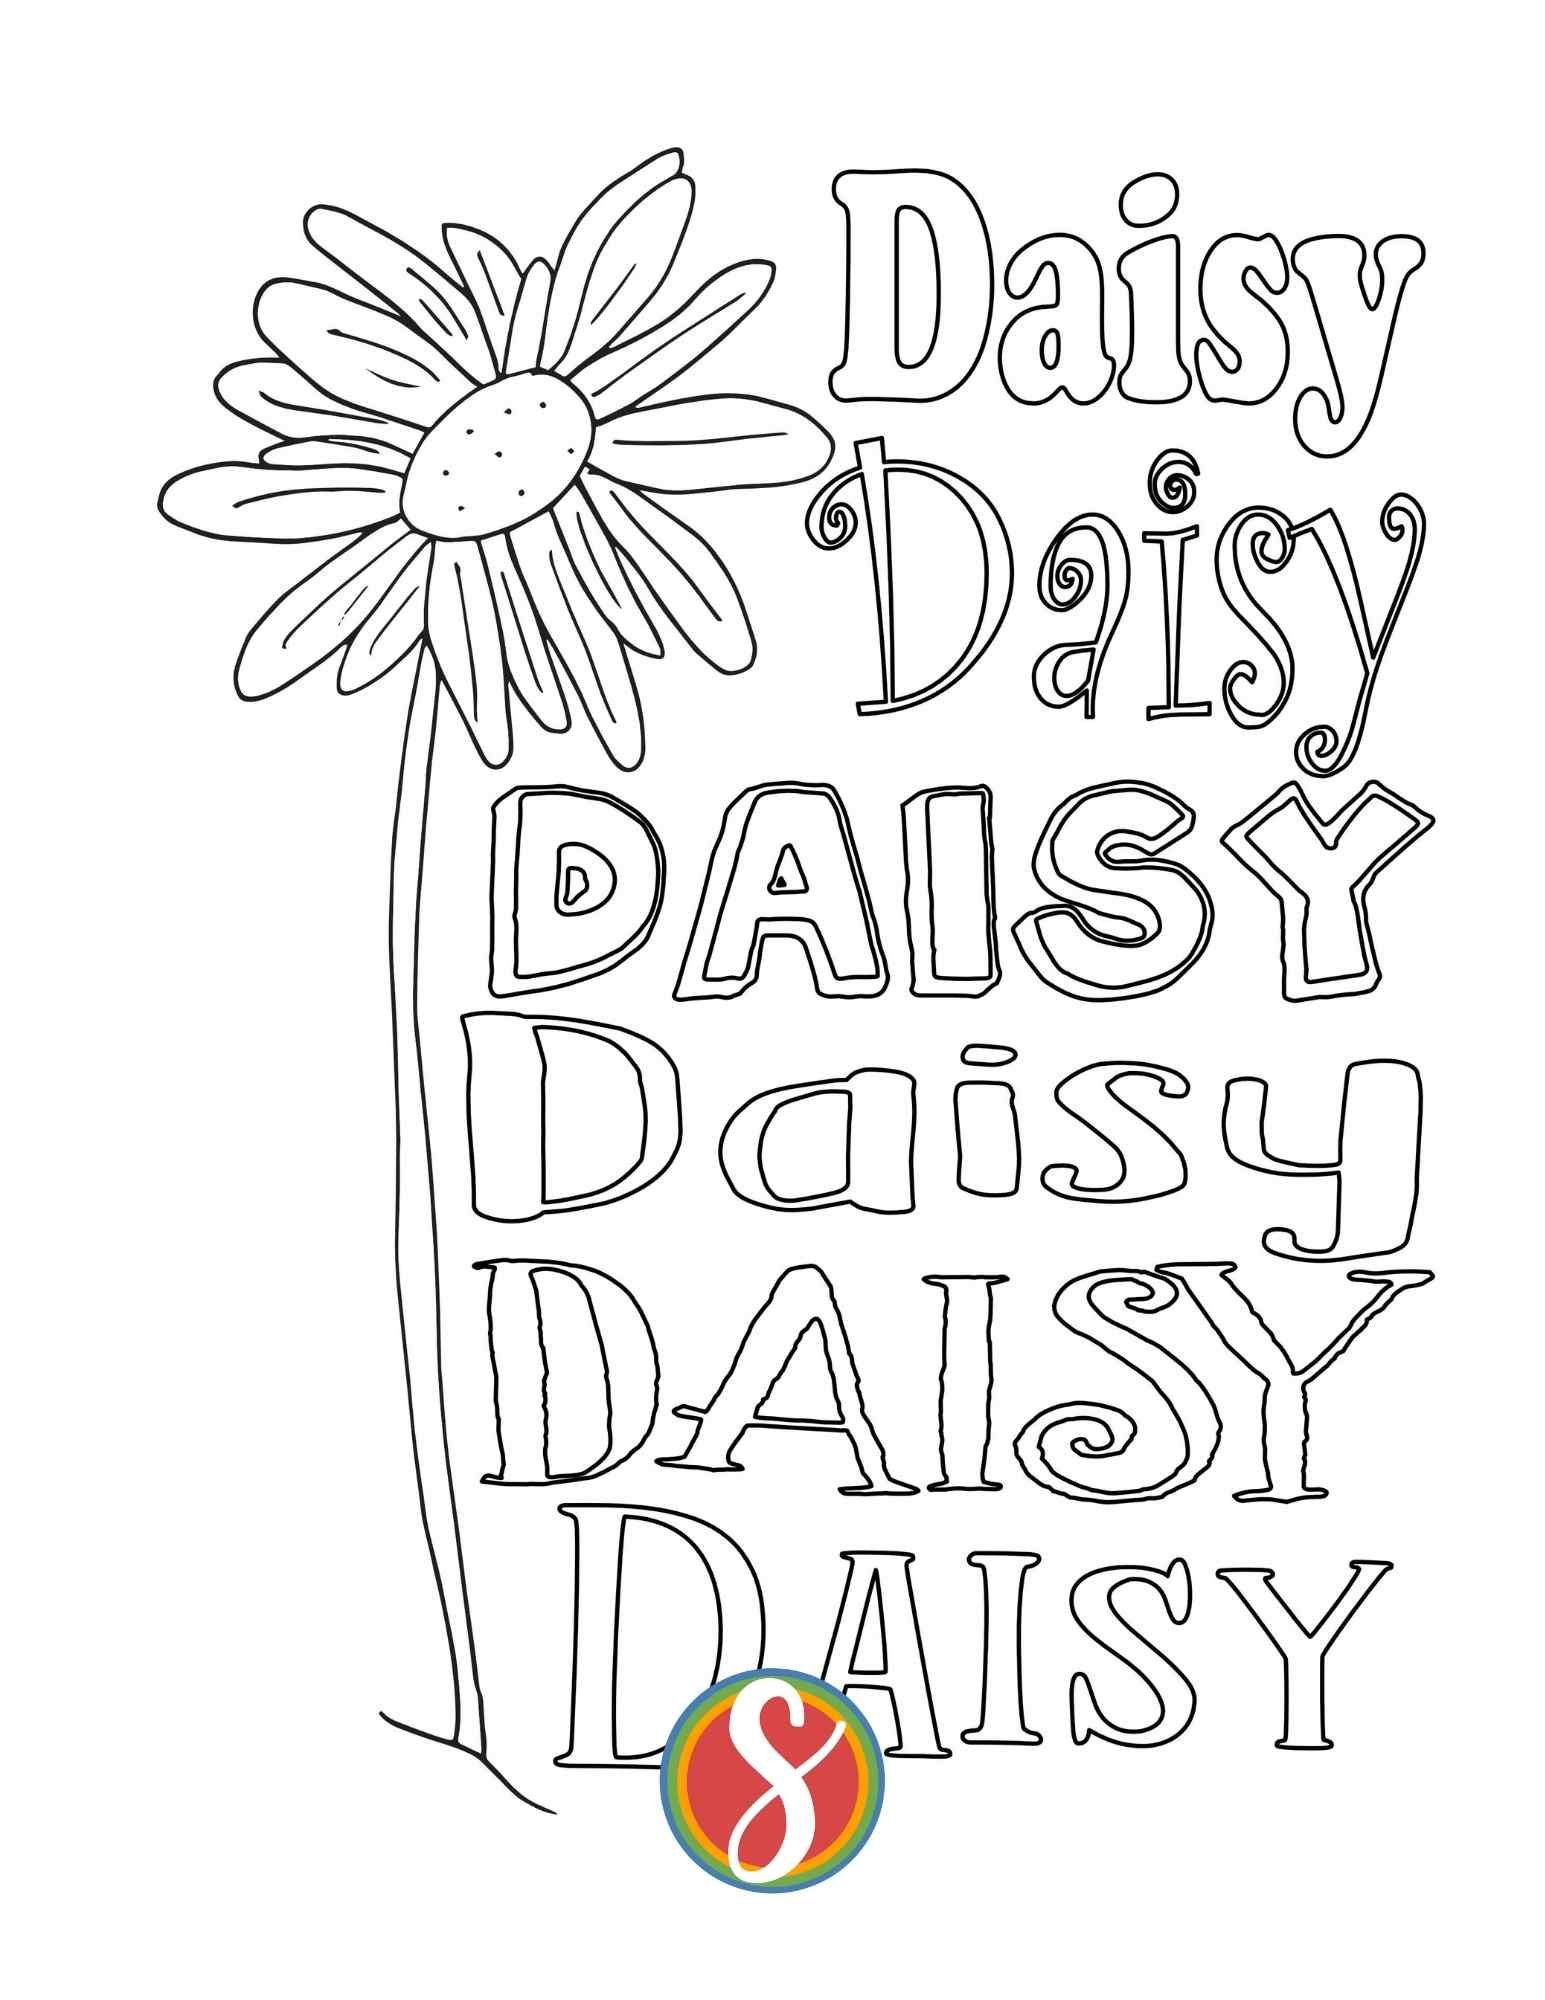 one long stemmed daisy with colorable text "daisy daisy daisy daisy" on a flower coloring page